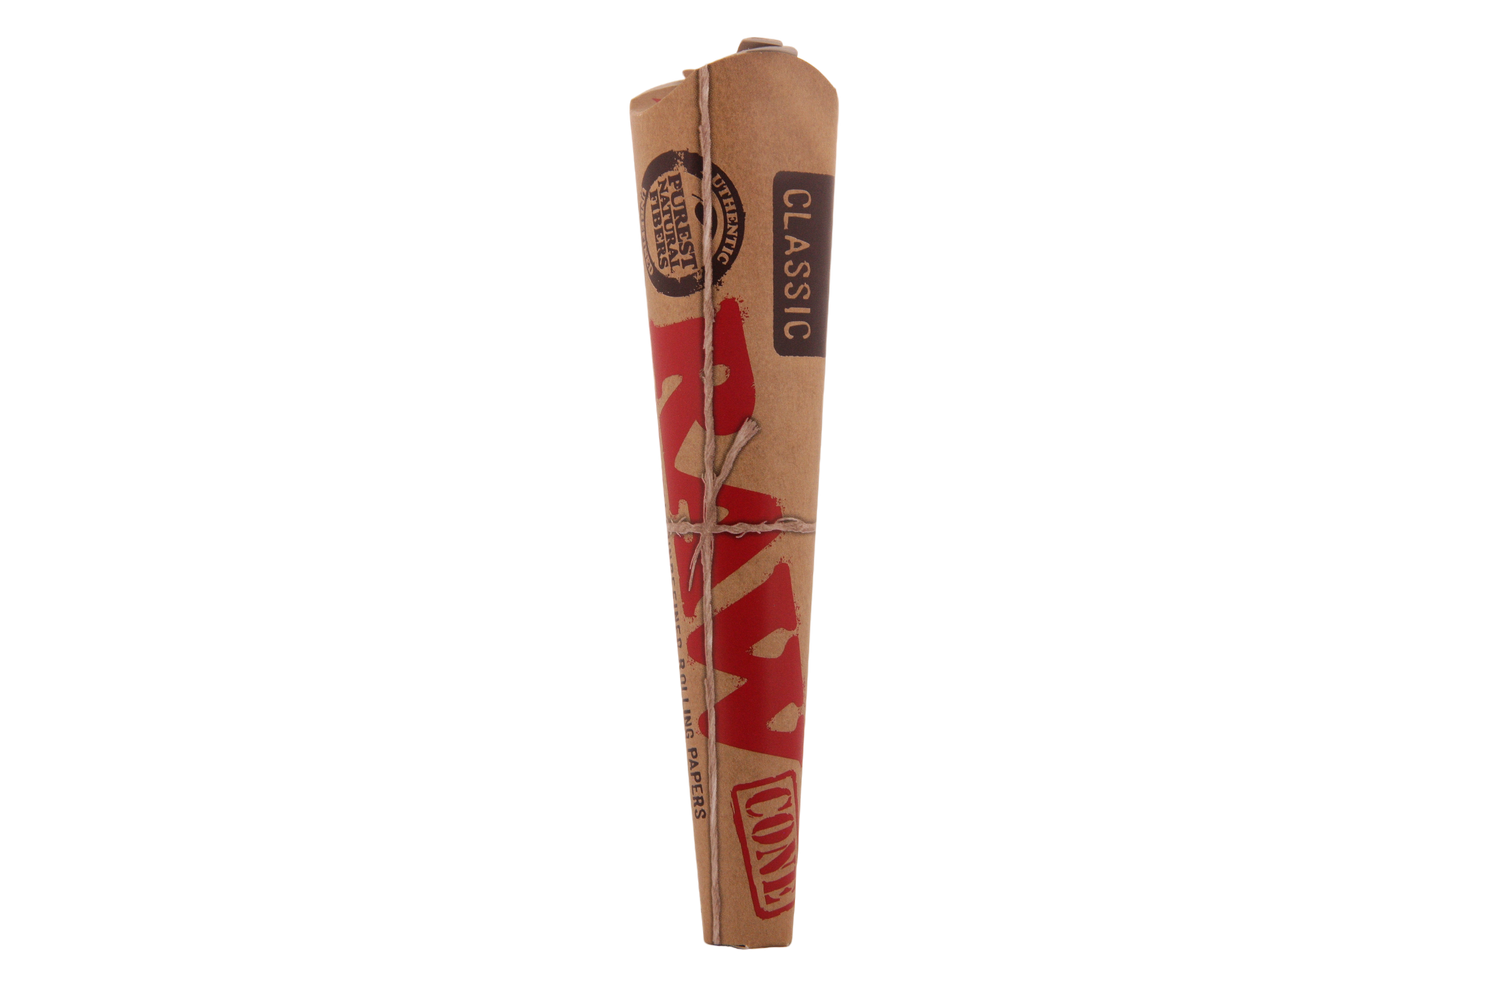 Raw Classic Cones - King Size 3pk